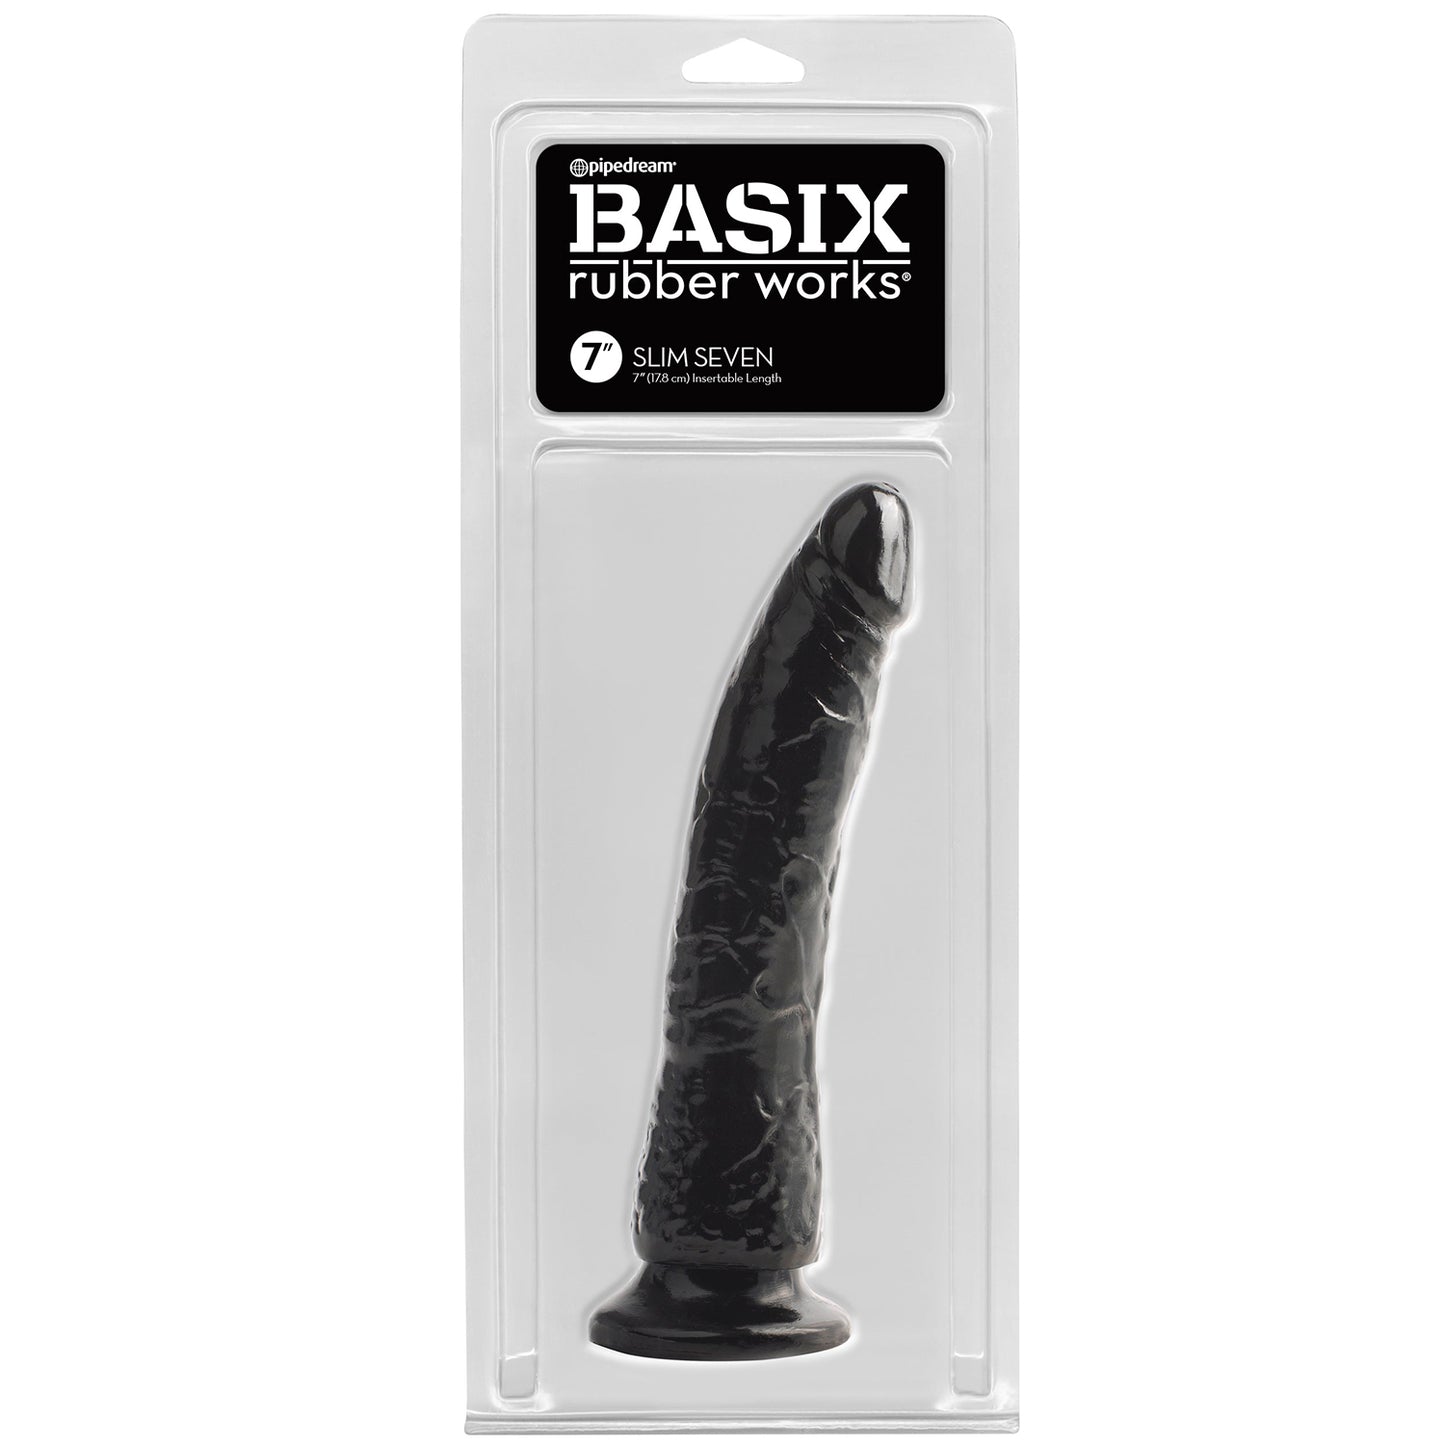 Basix Slim 7" with Suction Cup - Black